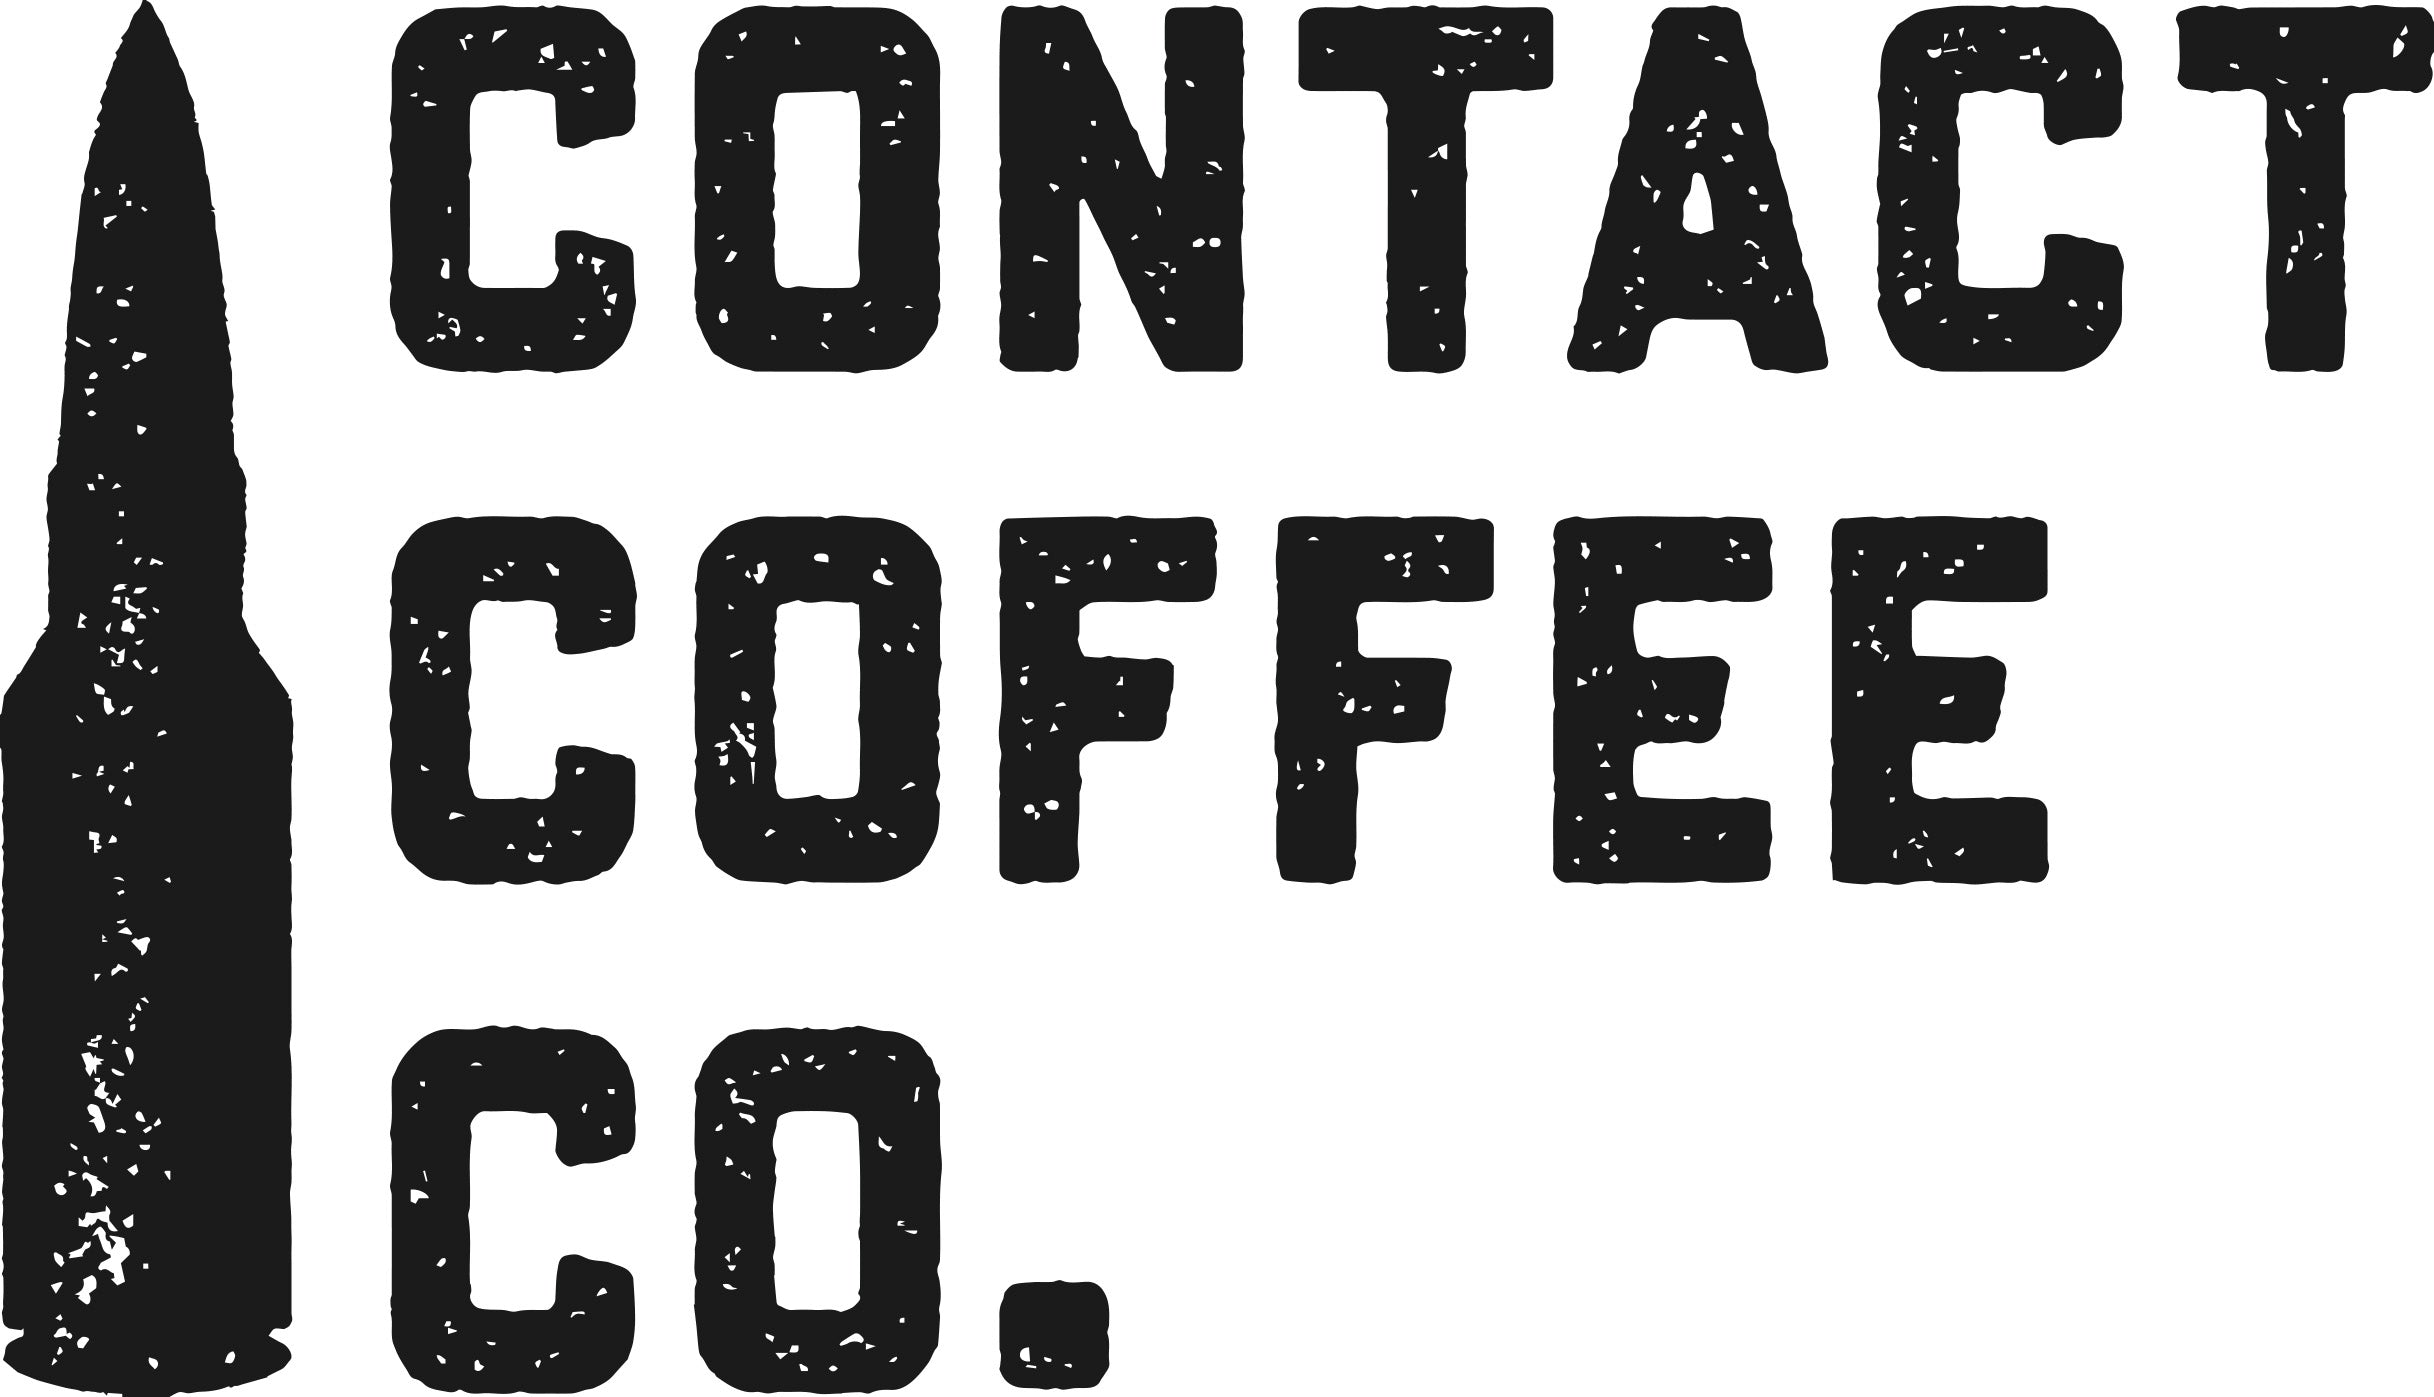 End Ex Coffee by Contact Coffee Co